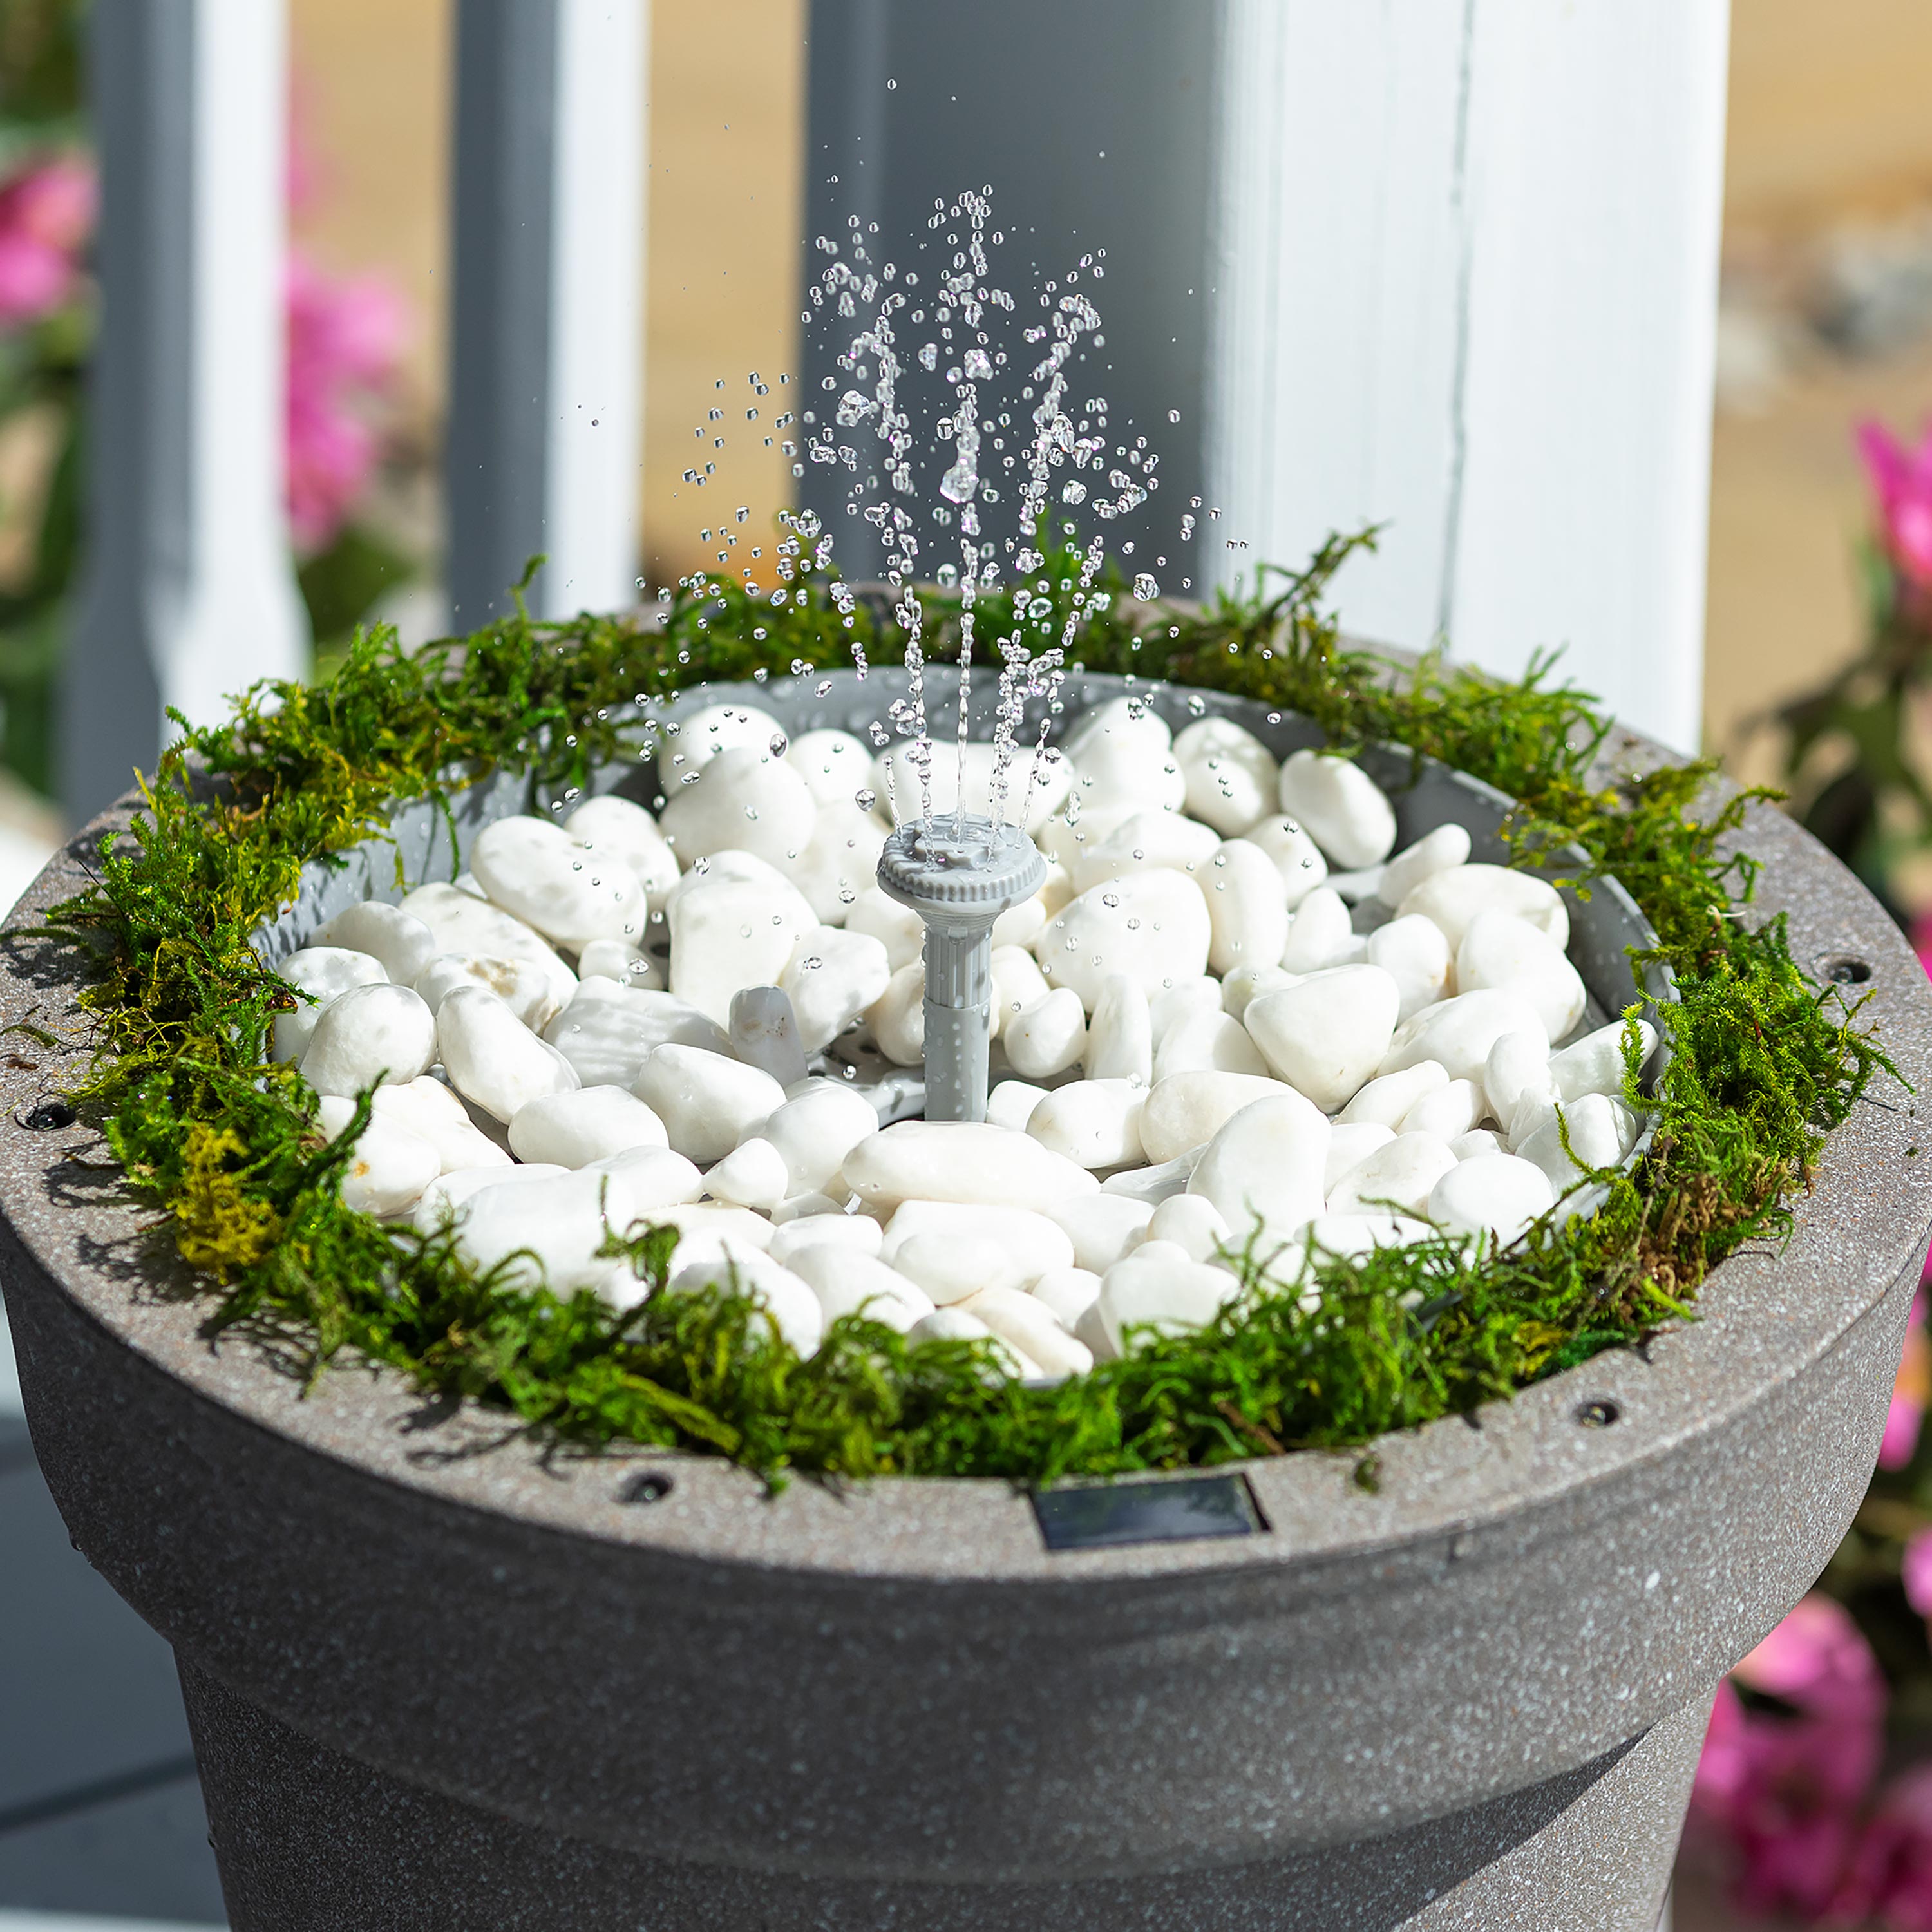 Hydria Cordless Rechargeable Smart Fountain Water Feature Kit